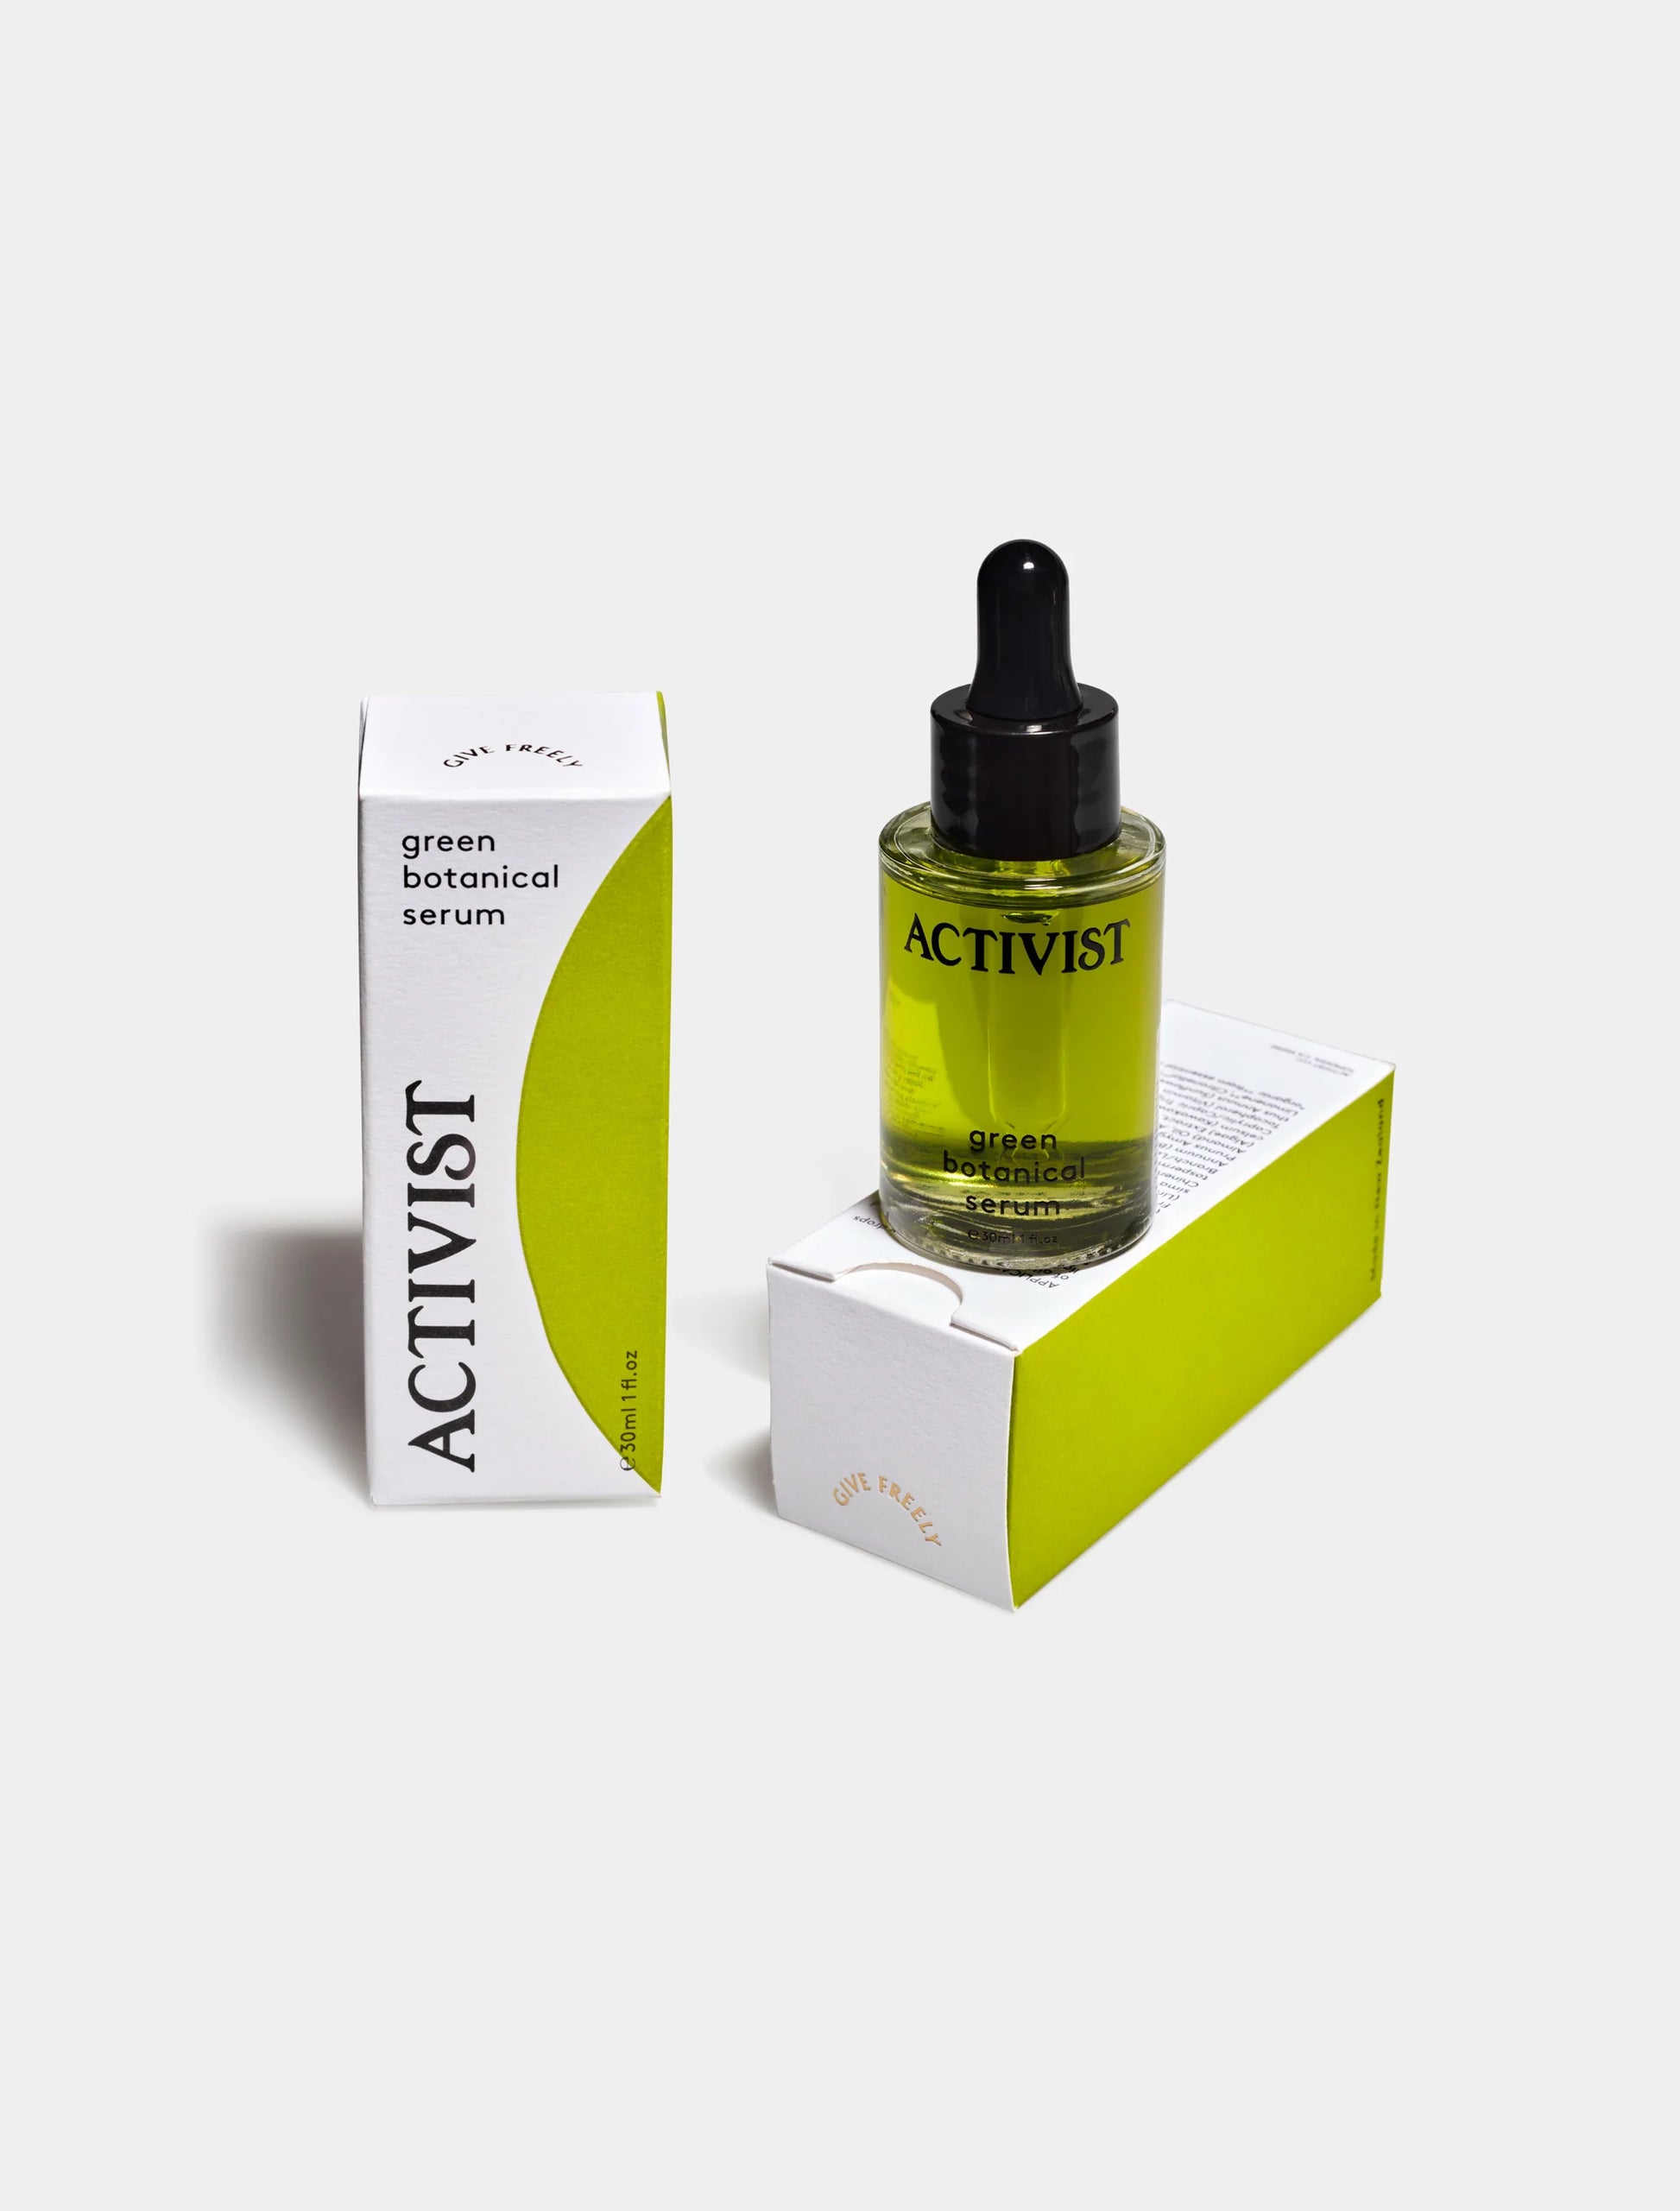 Green Botanical Serum from ACTIVIST bottle and packaging